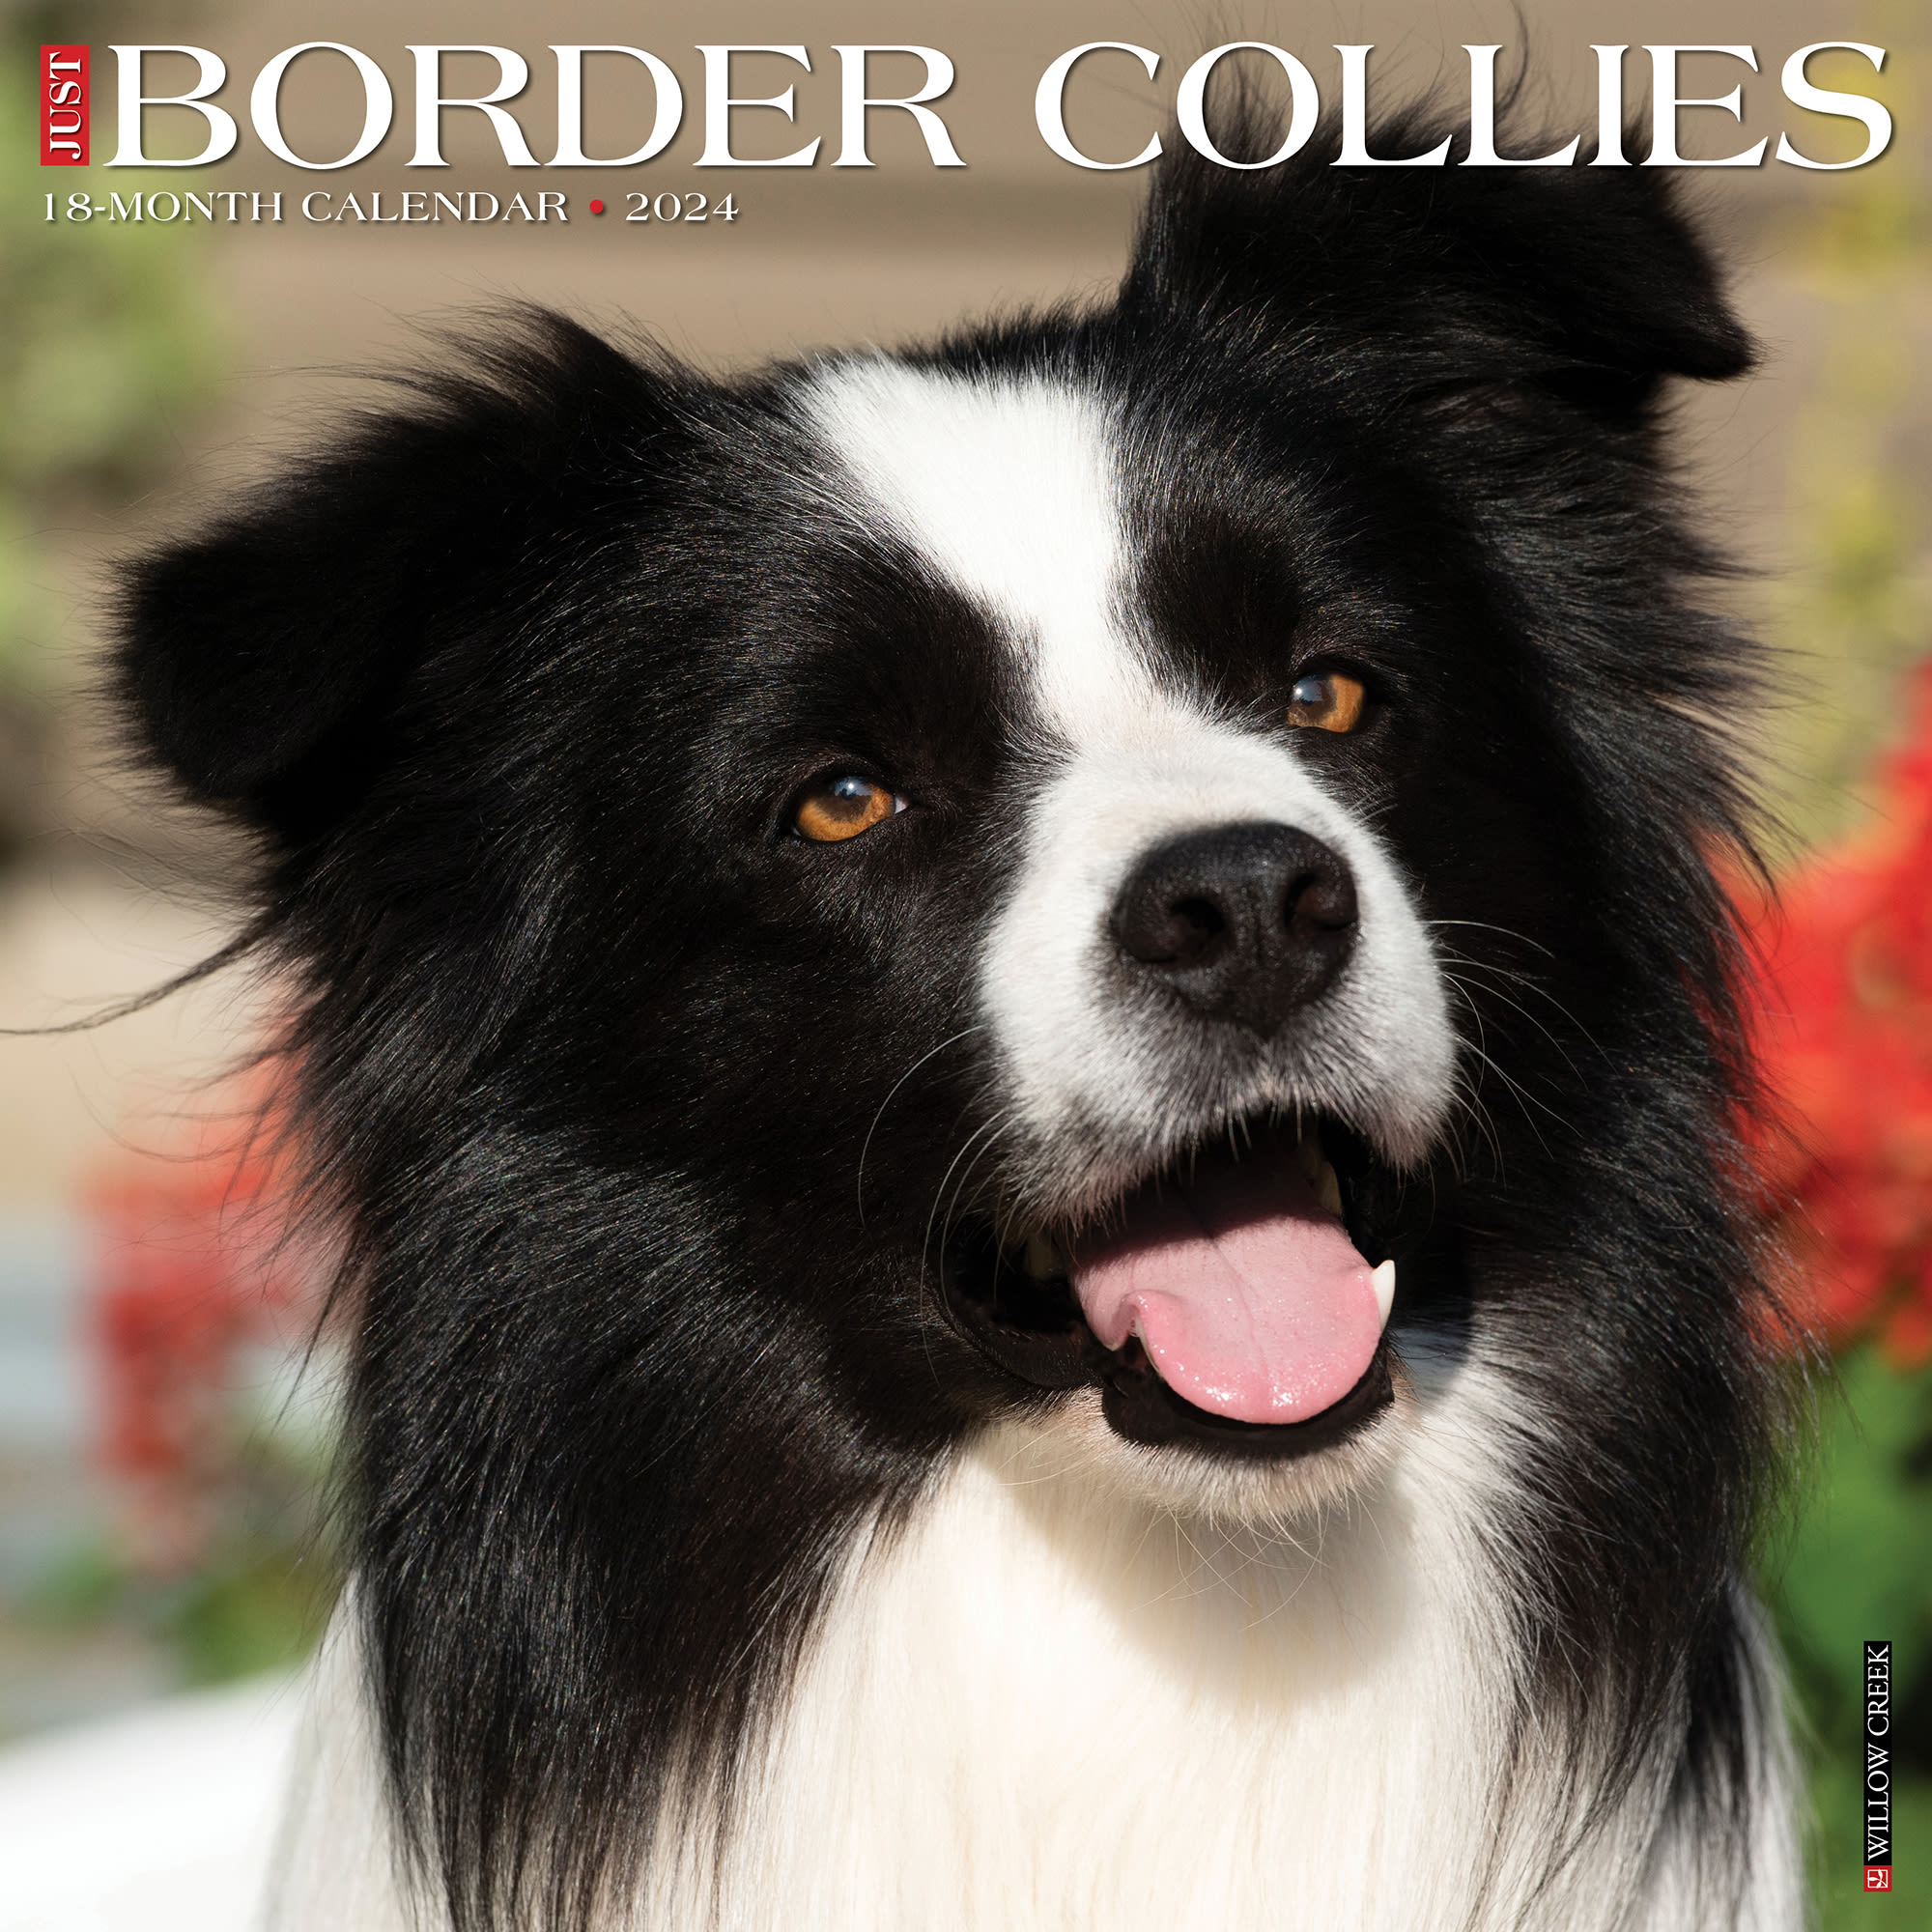 Just Border Collie Puppies 2023 Wall by Willow Creek Press